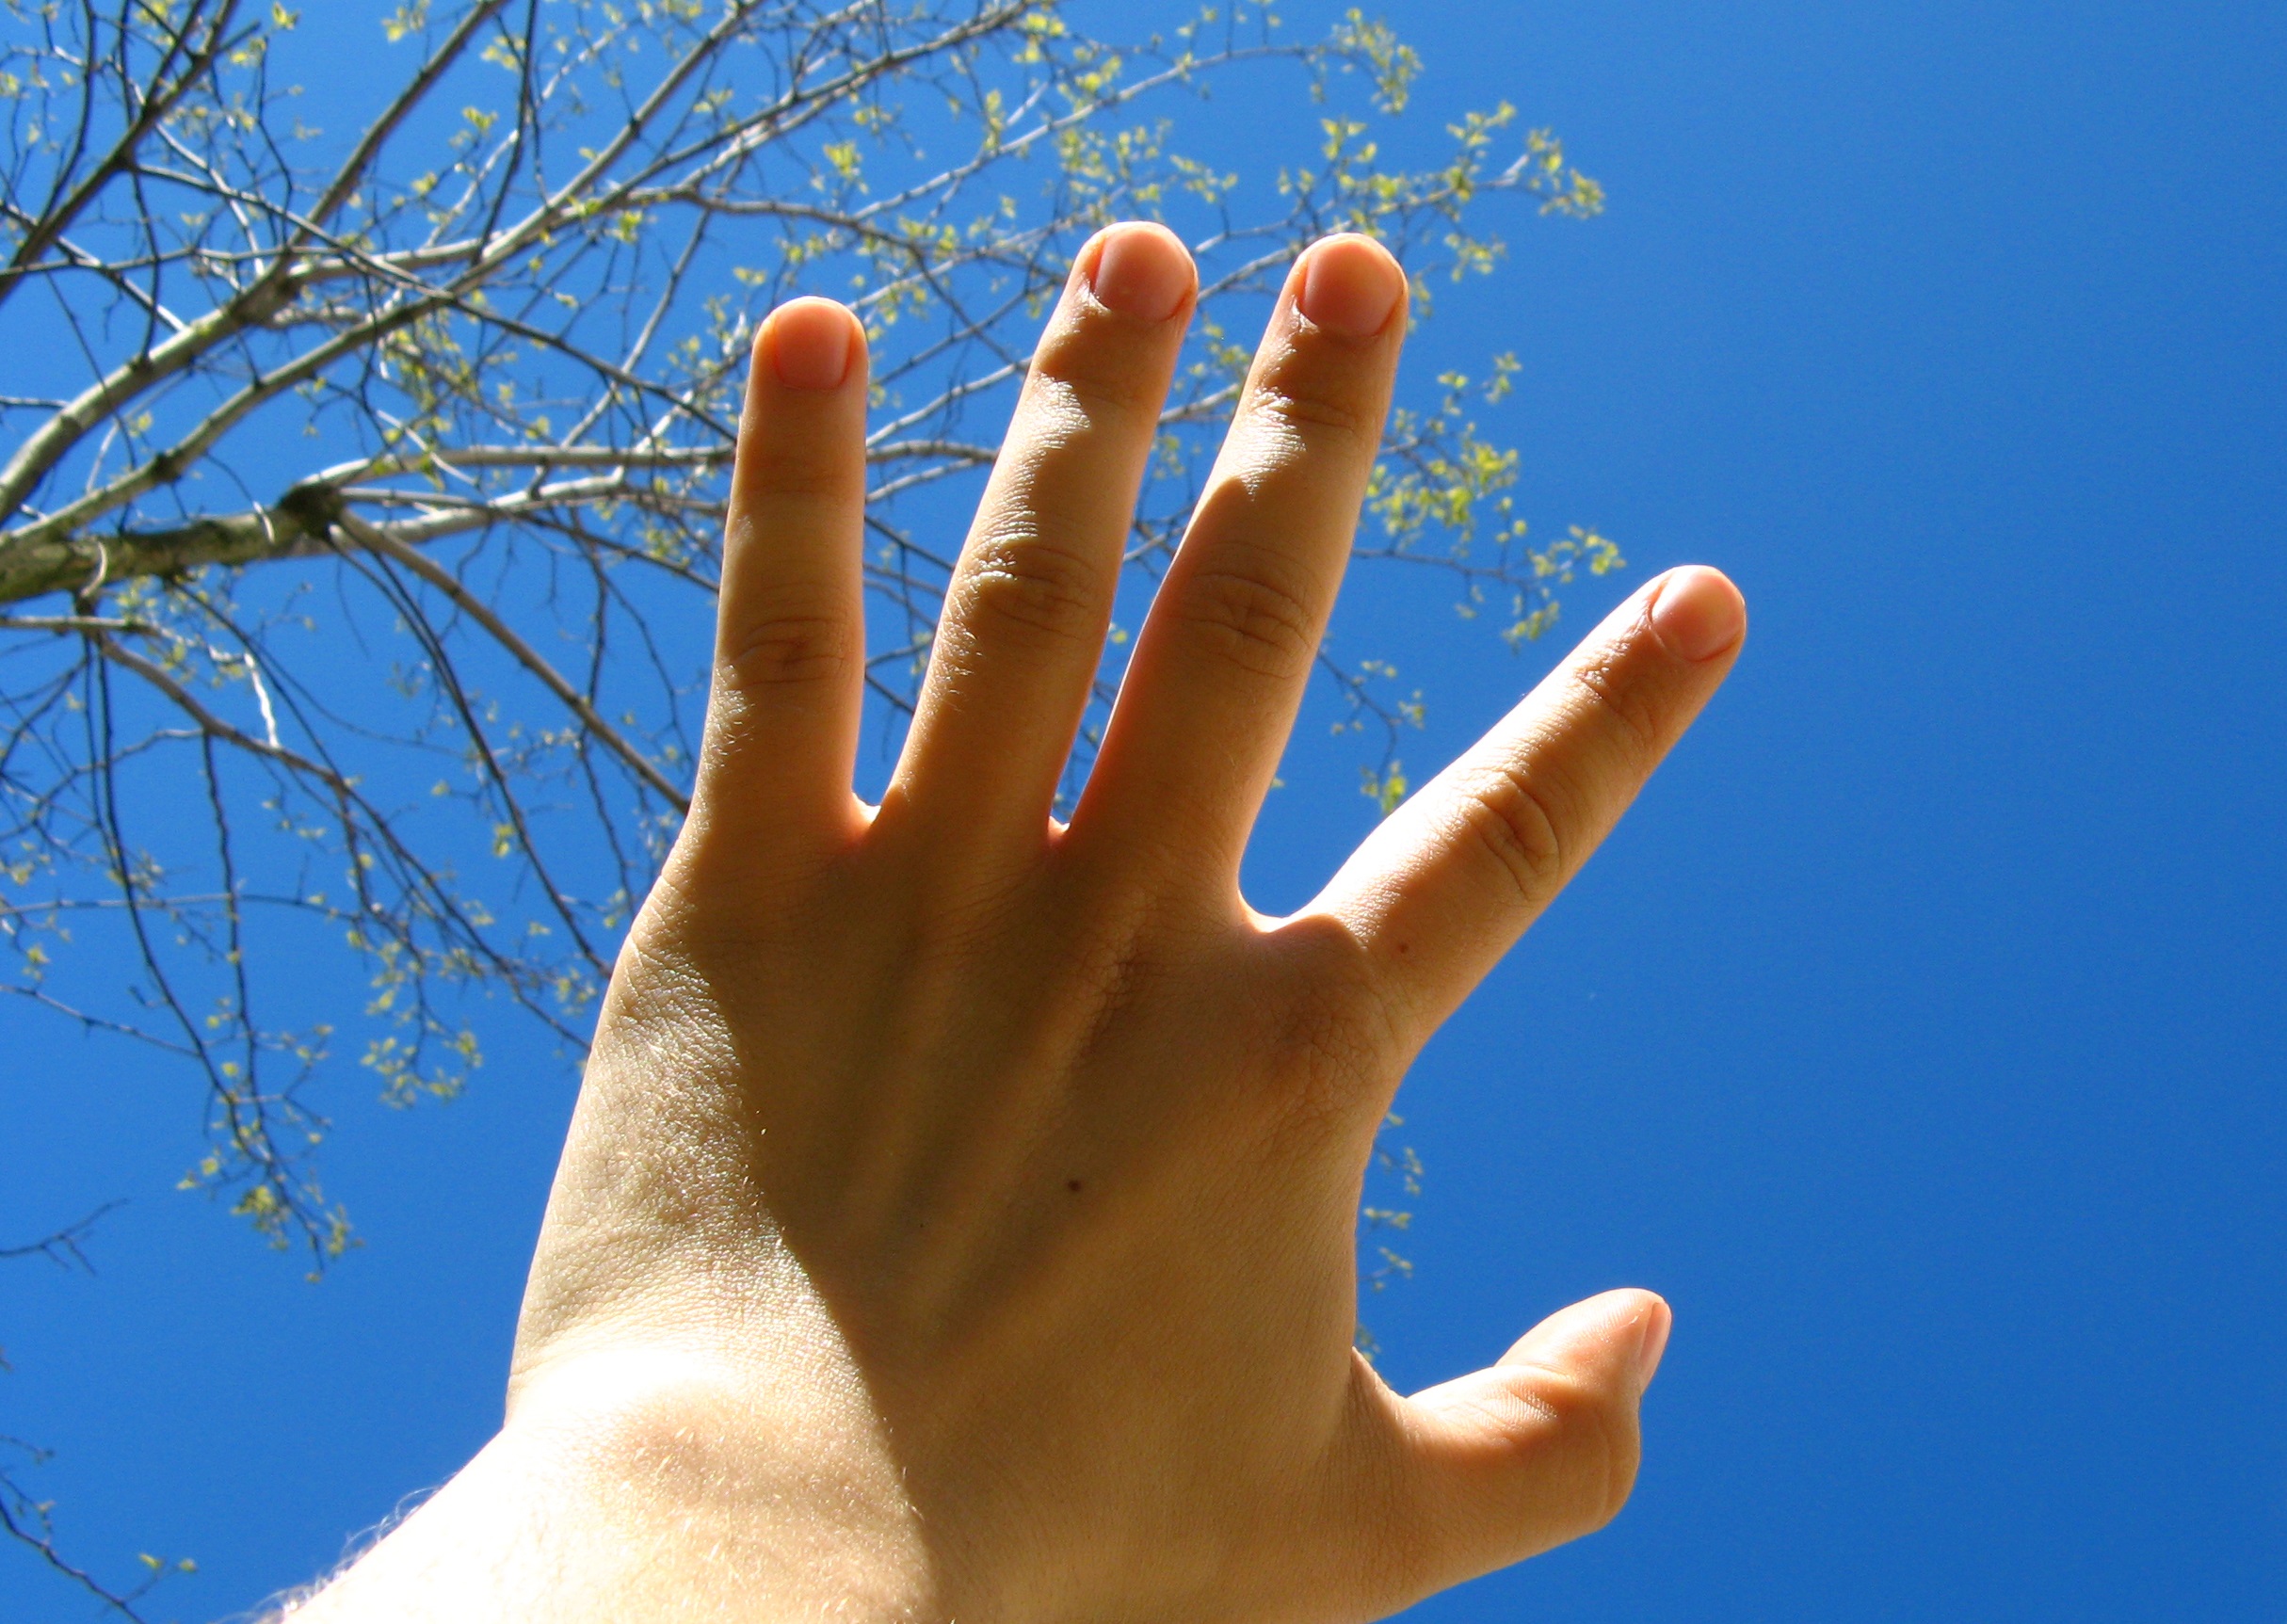 A hand reaching up to a tall tree and blue sky